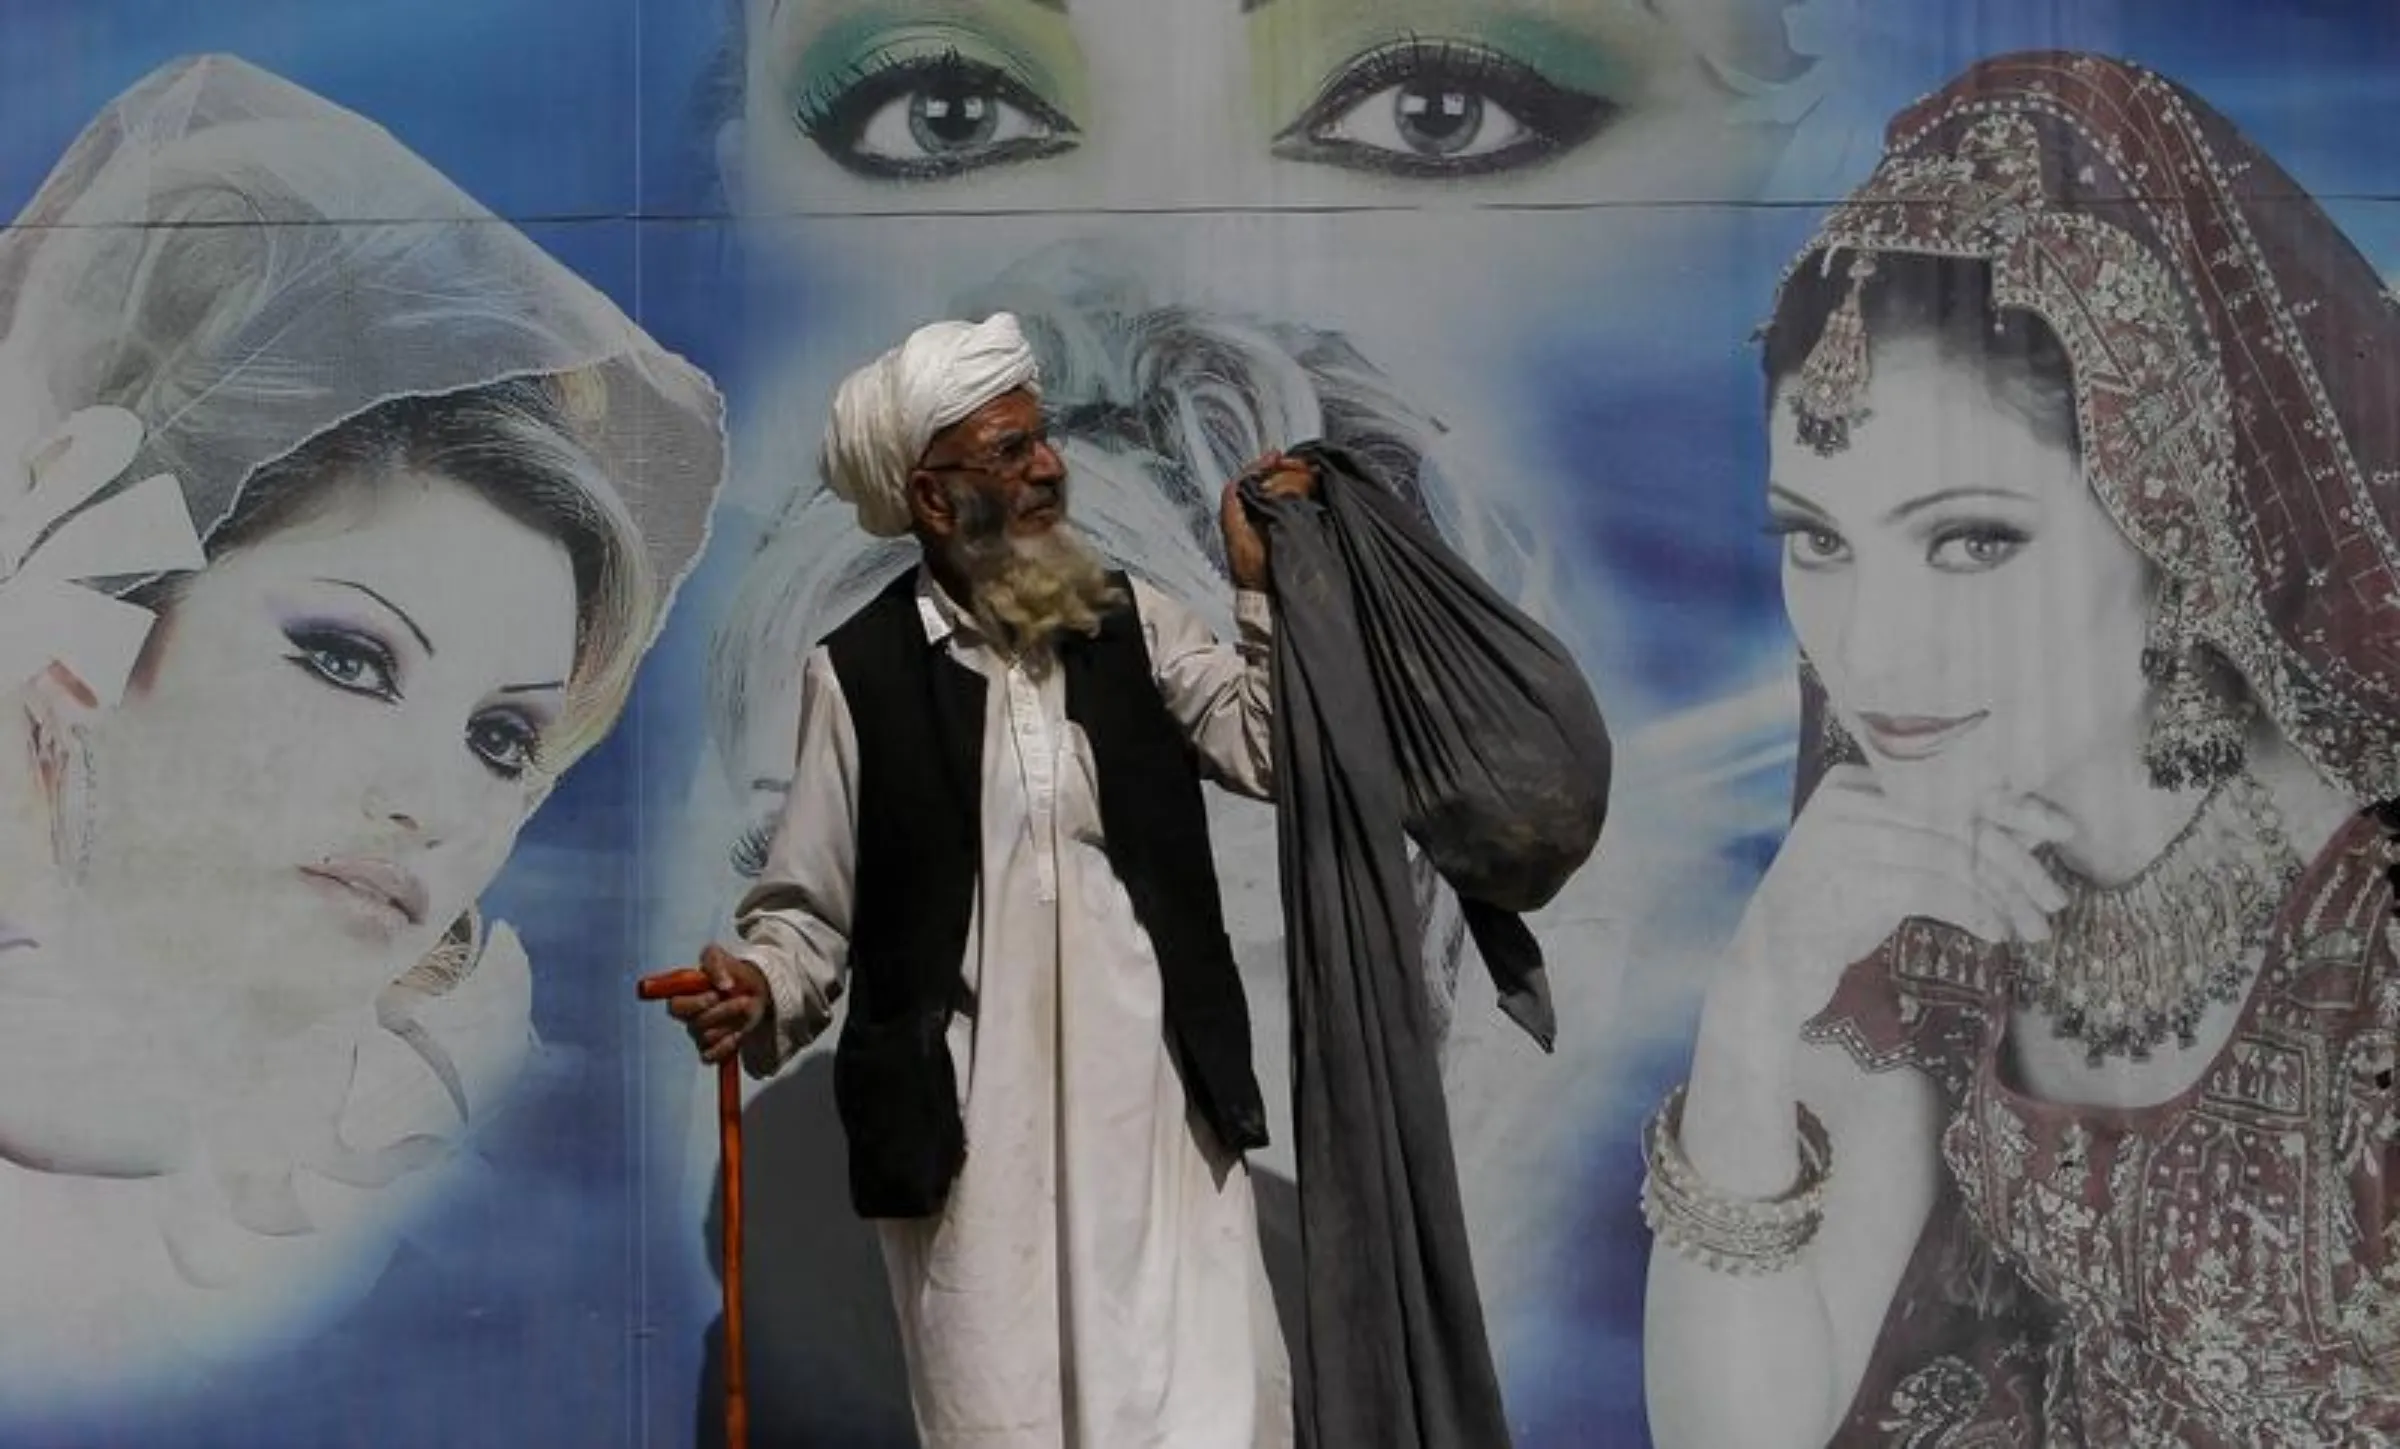 An Afghan man stands in front of a beauty saloon shop in Kabul